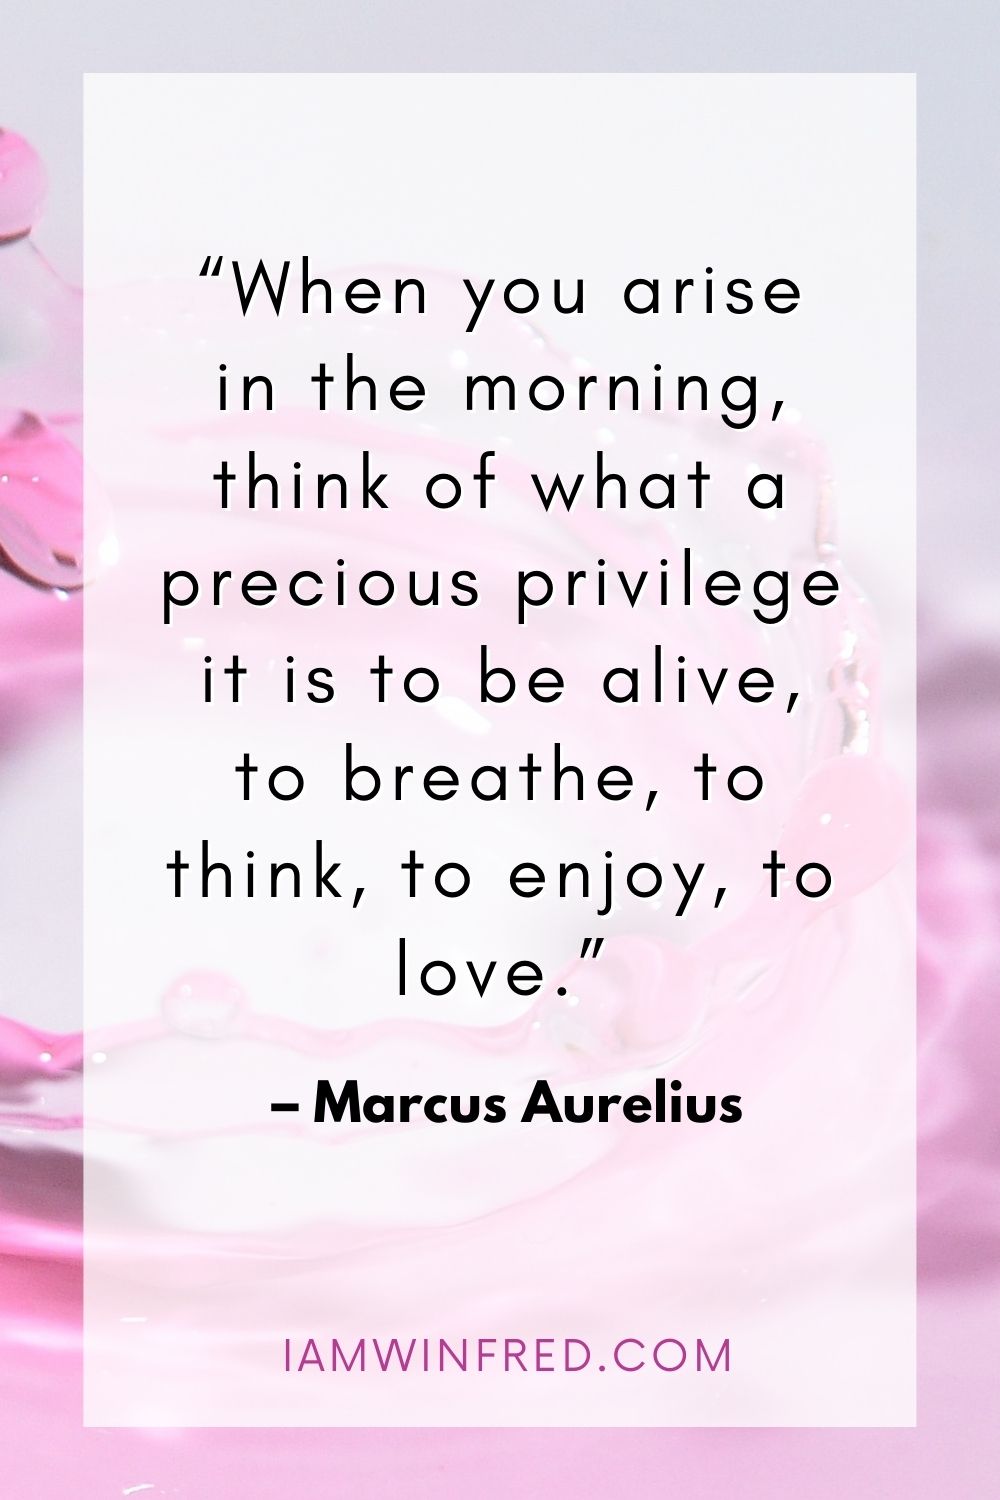 When You Arise In The Morning Think Of What A Precious Privilege It Is To Be Alive To Breathe To Think To Enjoy To Love.